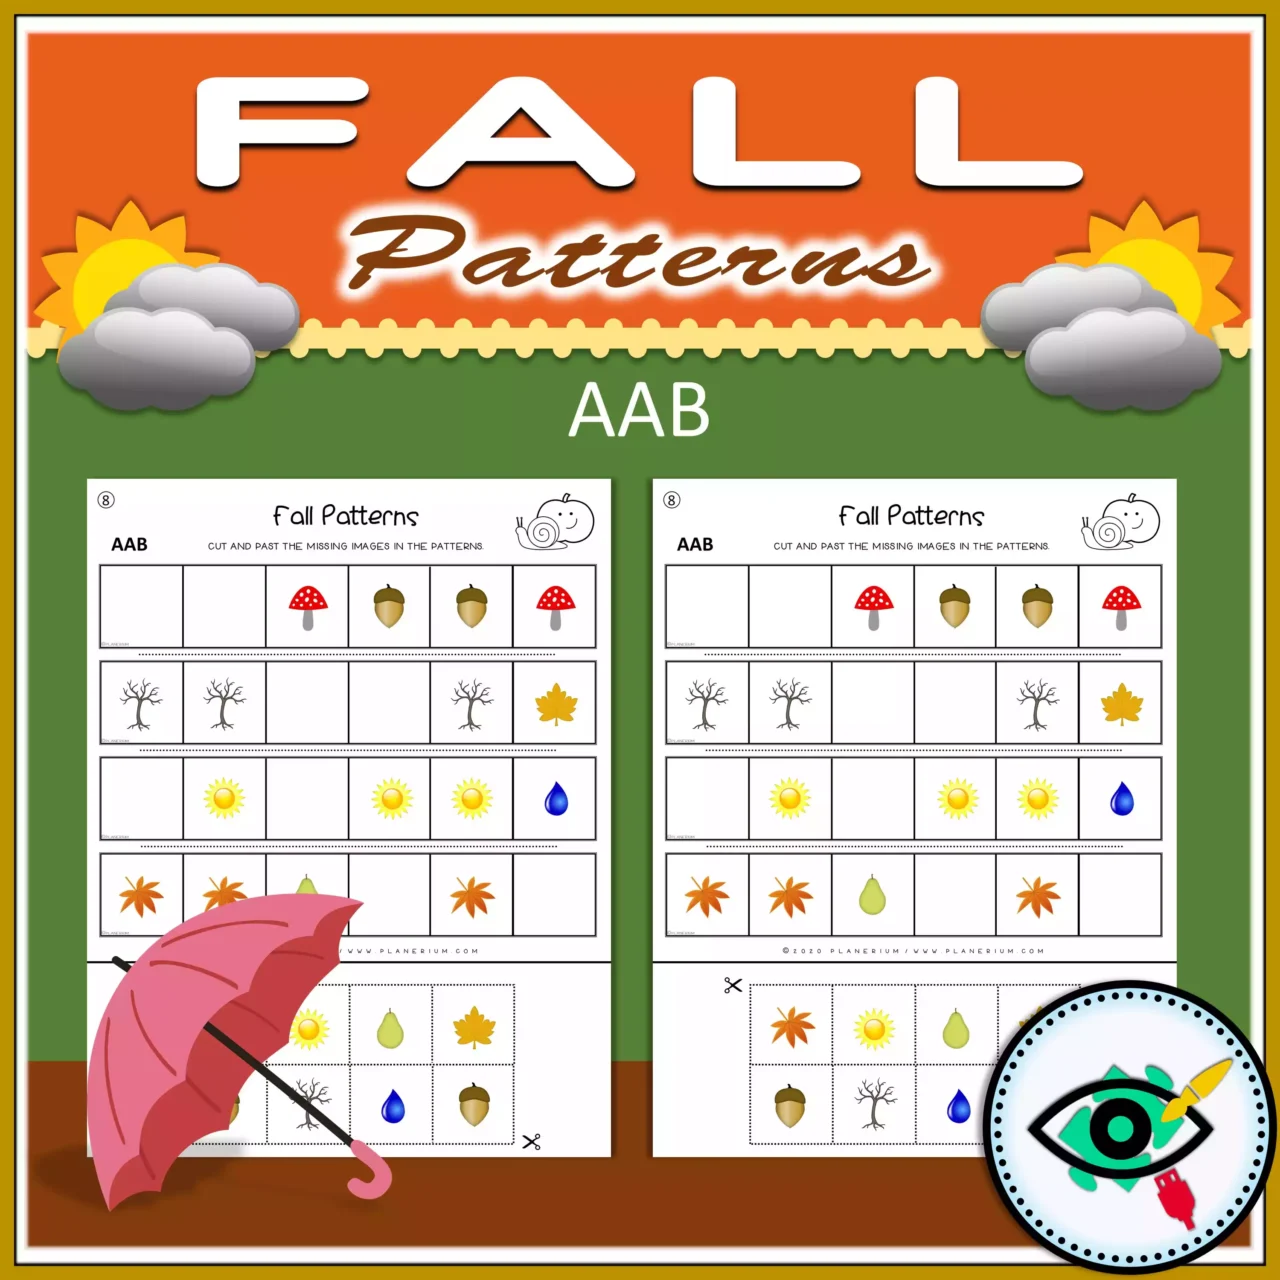 Fall - Patterns Activity - Image Title 5